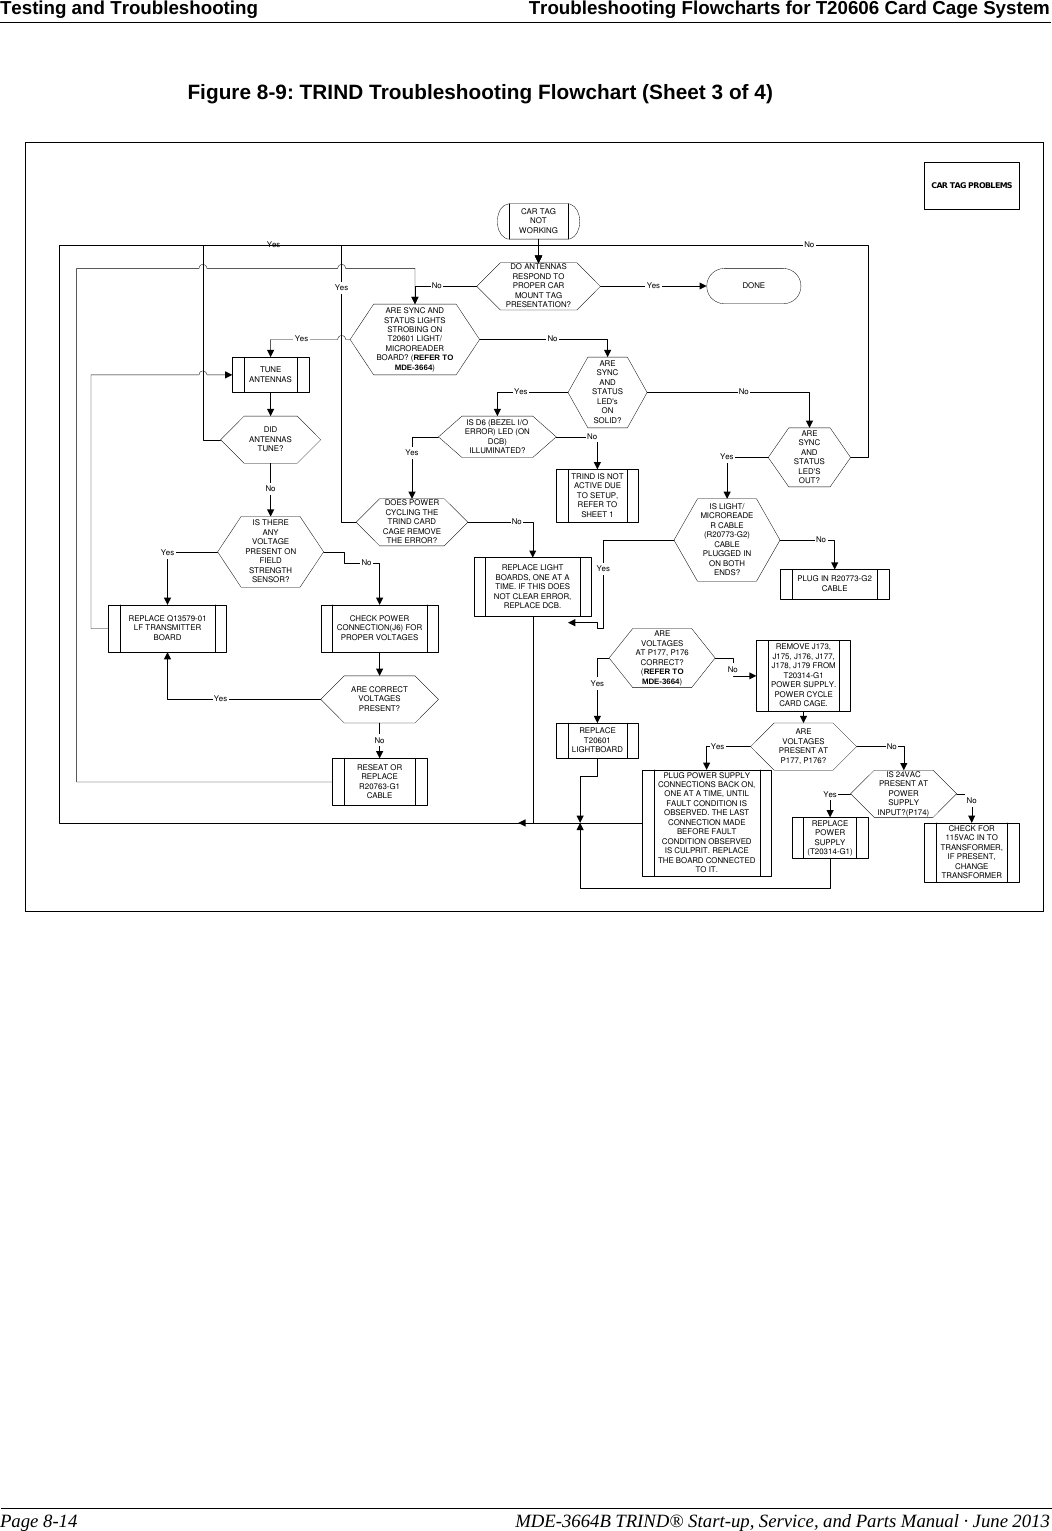 Testing and Troubleshooting Troubleshooting Flowcharts for T20606 Card Cage SystemPage 8-14                                                                                                  MDE-3664B TRIND® Start-up, Service, and Parts Manual · June 2013Figure 8-9: TRIND Troubleshooting Flowchart (Sheet 3 of 4)CAR TAG PROBLEMSCAR TAGNOTWORKINGDO ANTENNASRESPOND TOPROPER CARMOUNT TAGPRESENTATION?TUNEANTENNASDIDANTENNASTUNE?NoIS THEREANYVOLTAGEPRESENT ONFIELDSTRENGTHSENSOR?YesNoREPLACE Q13579-01LF TRANSMITTERBOARDARE SYNC ANDSTATUS LIGHTSSTROBING ONT20601 LIGHT/MICROREADERBOARD? (REFER TOMDE-3664)YesNoCHECK POWERCONNECTION(J6) FORPROPER VOLTAGESARE CORRECTVOLTAGESPRESENT?YesNoARESYNCANDSTATUSLED&apos;sONSOLID?YesYesYesIS D6 (BEZEL I/OERROR) LED (ONDCB)ILLUMINATED?YesDOES POWERCYCLING THETRIND CARDCAGE REMOVETHE ERROR?YesNoNoNoRESEAT ORREPLACER20763-G1CABLENoREPLACE LIGHTBOARDS, ONE AT ATIME. IF THIS DOESNOT CLEAR ERROR,REPLACE DCB.TRIND IS NOTACTIVE DUETO SETUP,REFER TOSHEET 1ARESYNCANDSTATUSLED&apos;SOUT?YesNoIS LIGHT/MICROREADER CABLE(R20773-G2)CABLEPLUGGED INON BOTHENDS?NoPLUG IN R20773-G2CABLEYesAREVOLTAGESAT P177, P176CORRECT?(REFER TOMDE-3664)YesREPLACET20601LIGHTBOARDNoREMOVE J173,J175, J176, J177,J178, J179 FROMT20314-G1POWER SUPPLY.POWER CYCLECARD CAGE.AREVOLTAGESPRESENT ATP177, P176?Yes NoPLUG POWER SUPPLYCONNECTIONS BACK ON,ONE AT A TIME, UNTILFAULT CONDITION ISOBSERVED. THE LASTCONNECTION MADEBEFORE FAULTCONDITION OBSERVEDIS CULPRIT. REPLACETHE BOARD CONNECTEDTO IT.IS 24VACPRESENT ATPOWERSUPPLYINPUT?(P174)YesREPLACEPOWERSUPPLY(T20314-G1)NoCHECK FOR115VAC IN TOTRANSFORMER,IF PRESENT,CHANGETRANSFORMERDONE